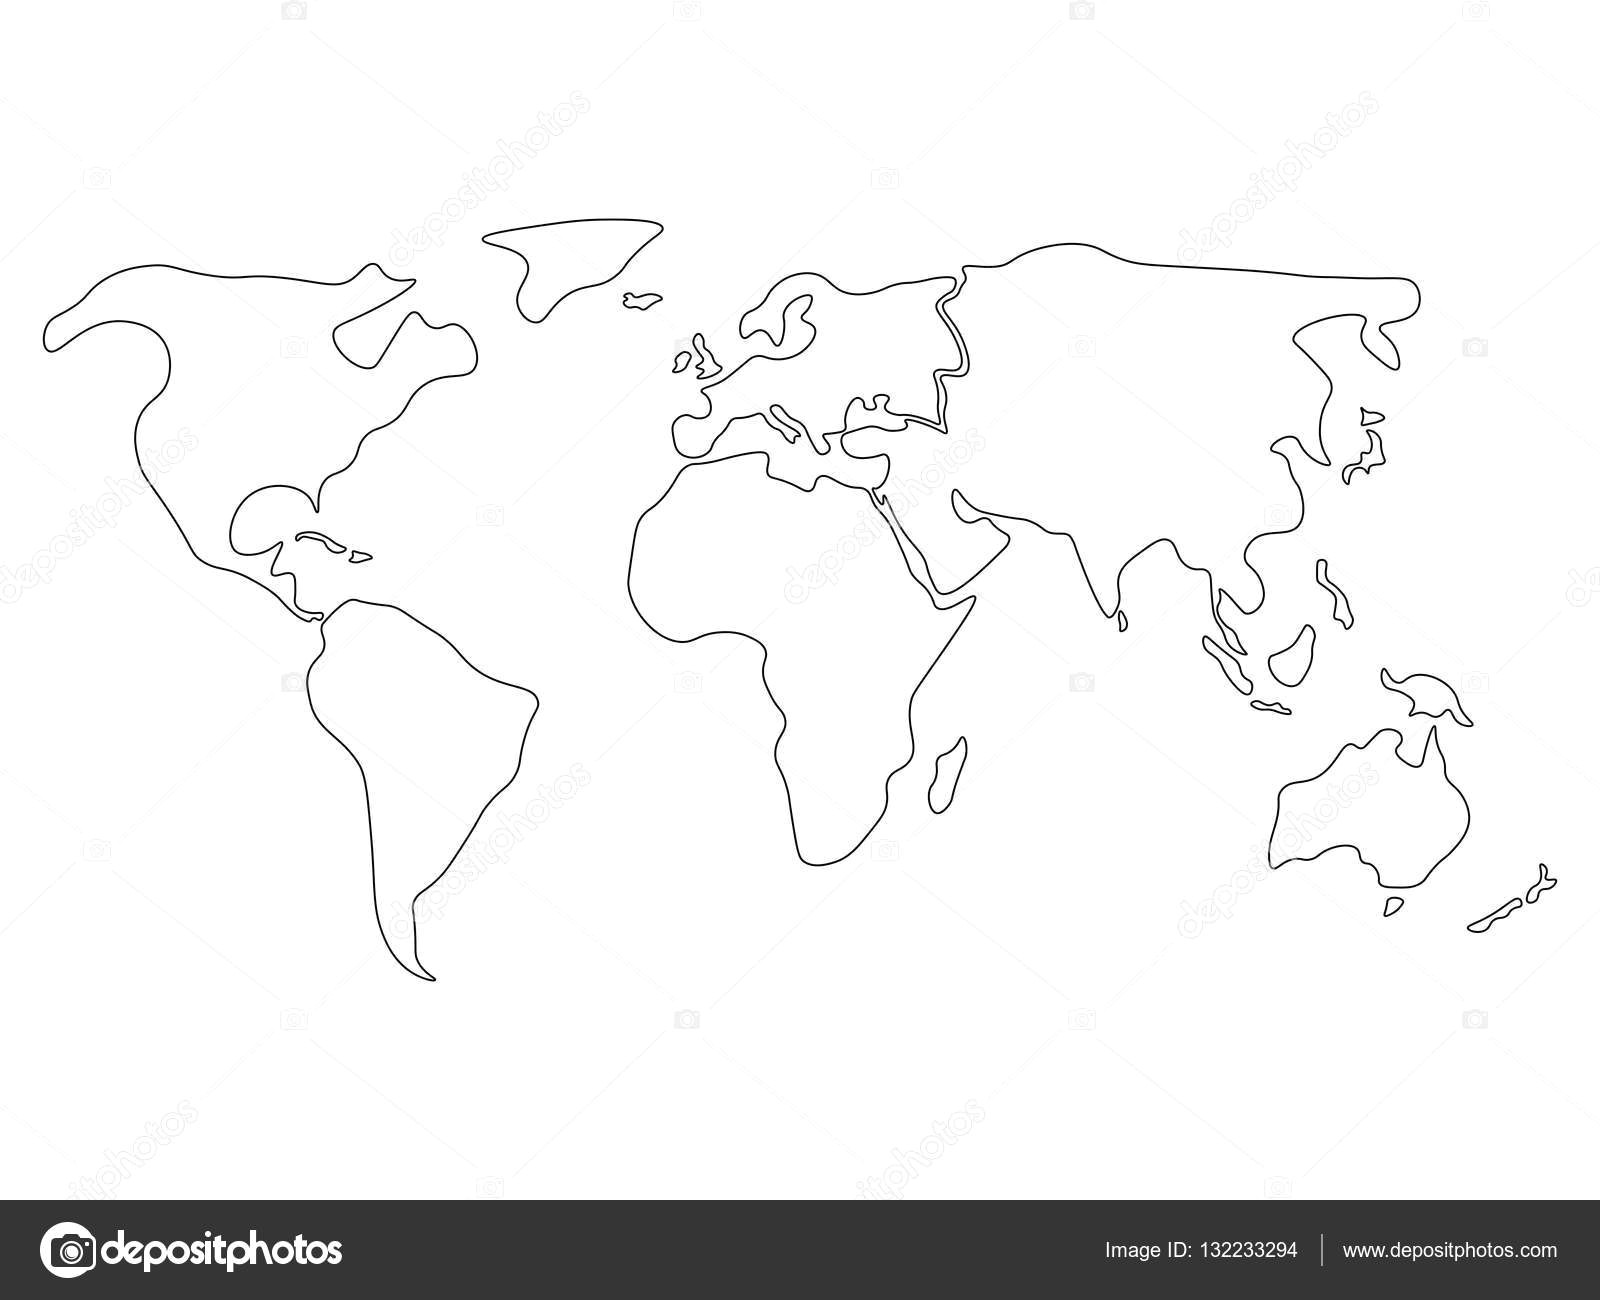 How to Draw A Map Easy Easy Draw Map Of the World Map Easy to Draw Easy World Maps